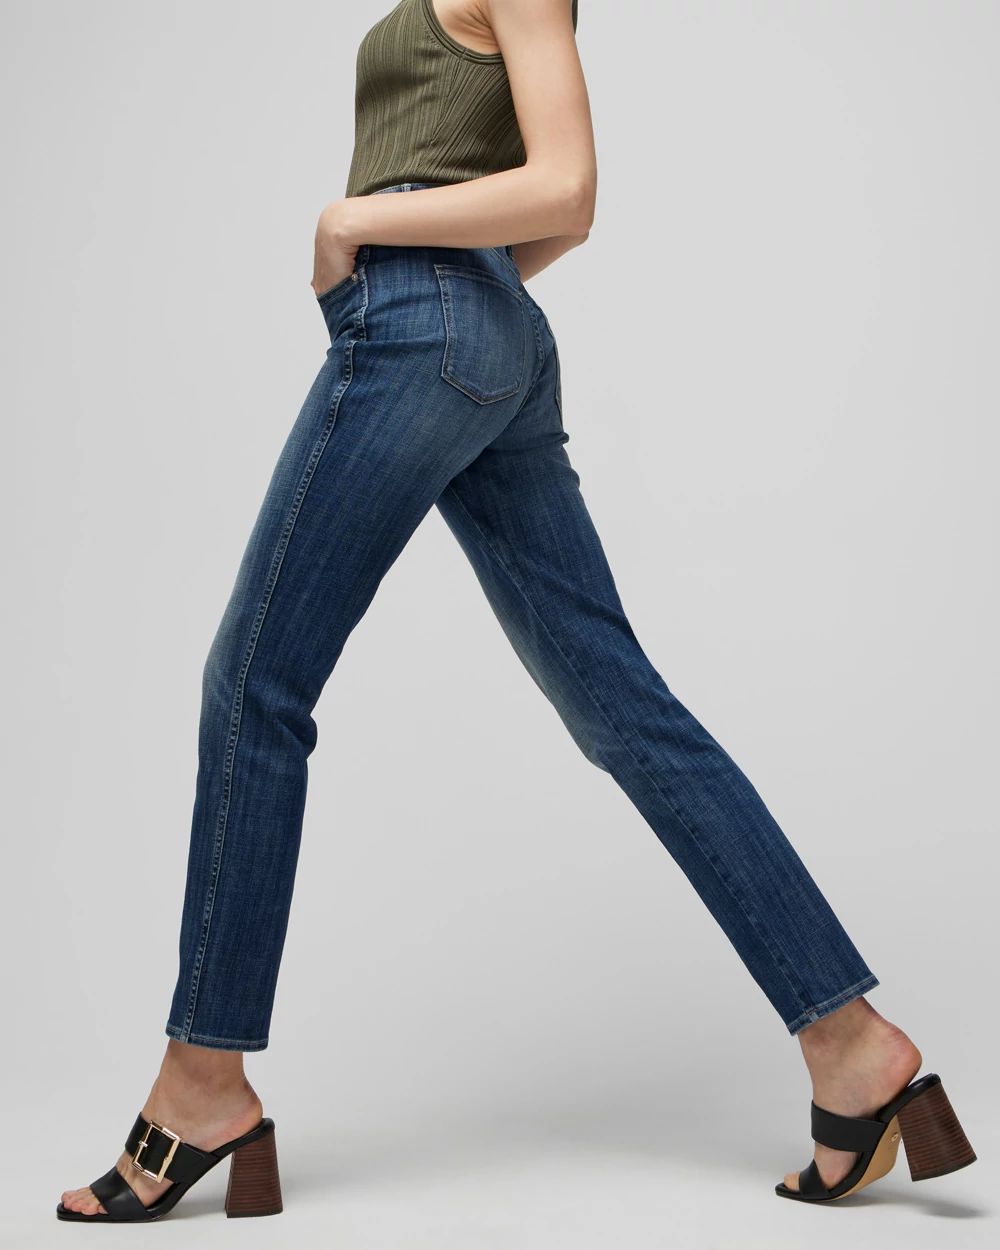 High-Rise Everyday Soft Denim  Straight Jeans click to view larger image.